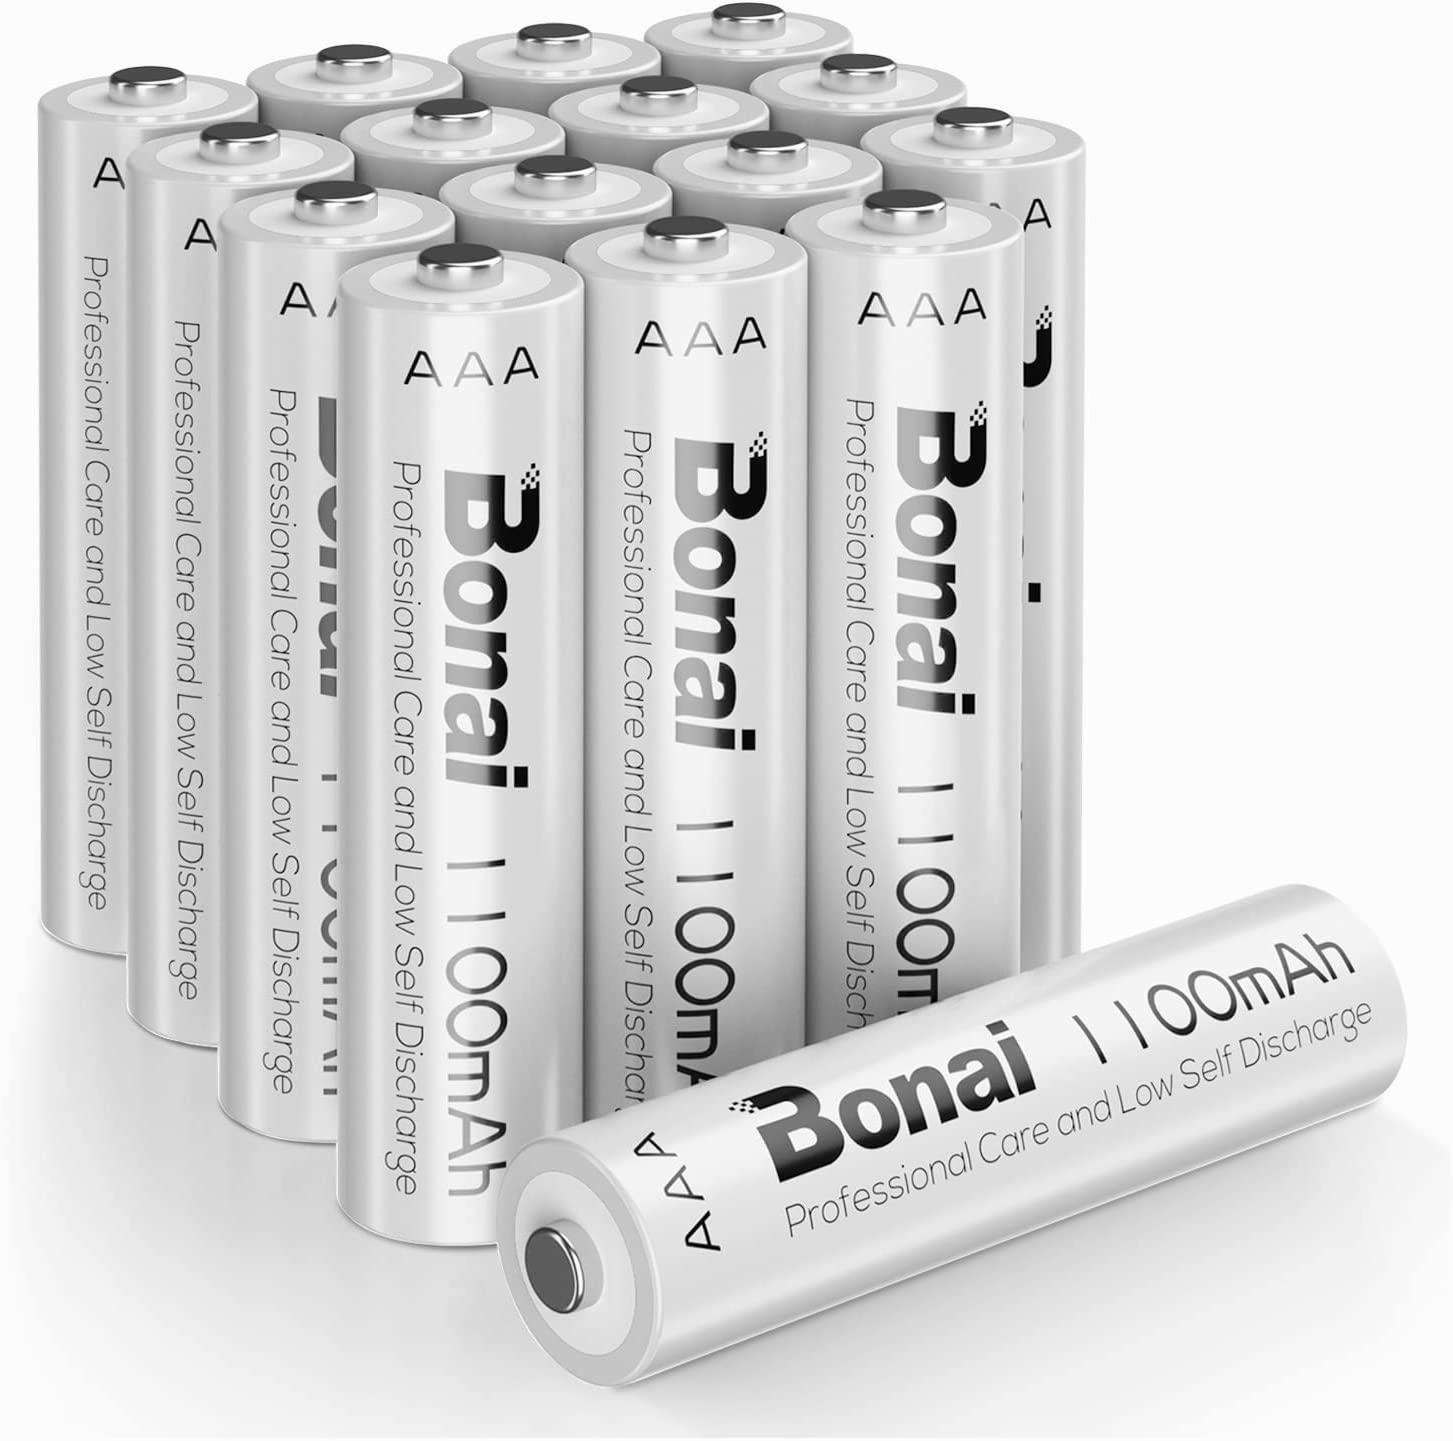 BONAI AAA Rechargeable Batteries 1.2V 1100mAh Ni-MH High-Capacity Triple-A Battery for Clocks, Remotes, Toys, Cameras, Flashlights, Games Controllers, E-Toothbrushes, Shavers, and More-16 Pack